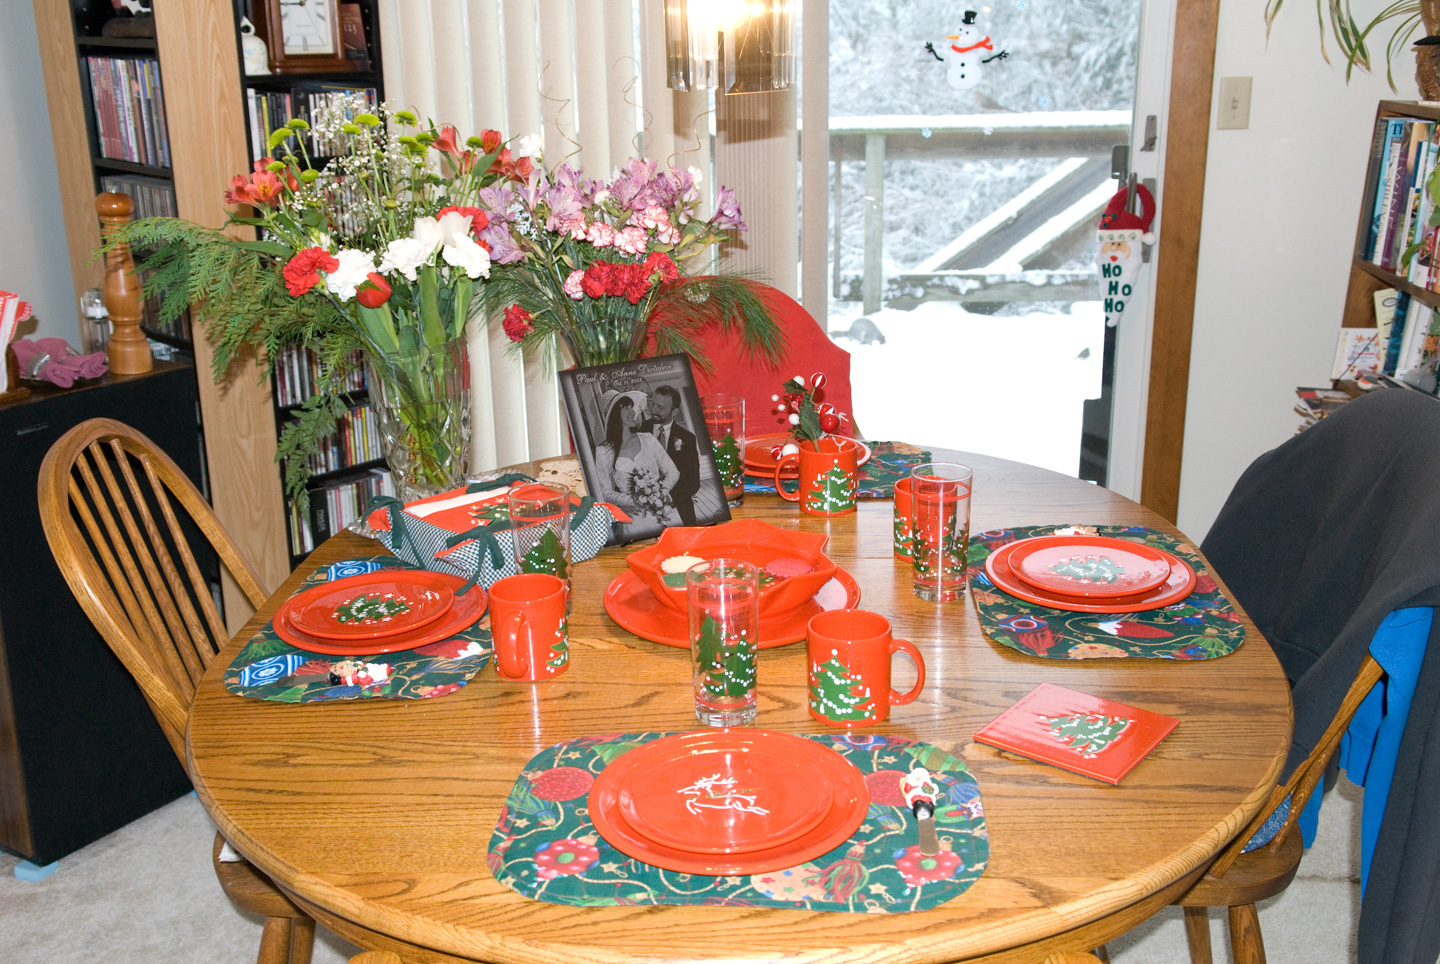 Table with Christmas place settings